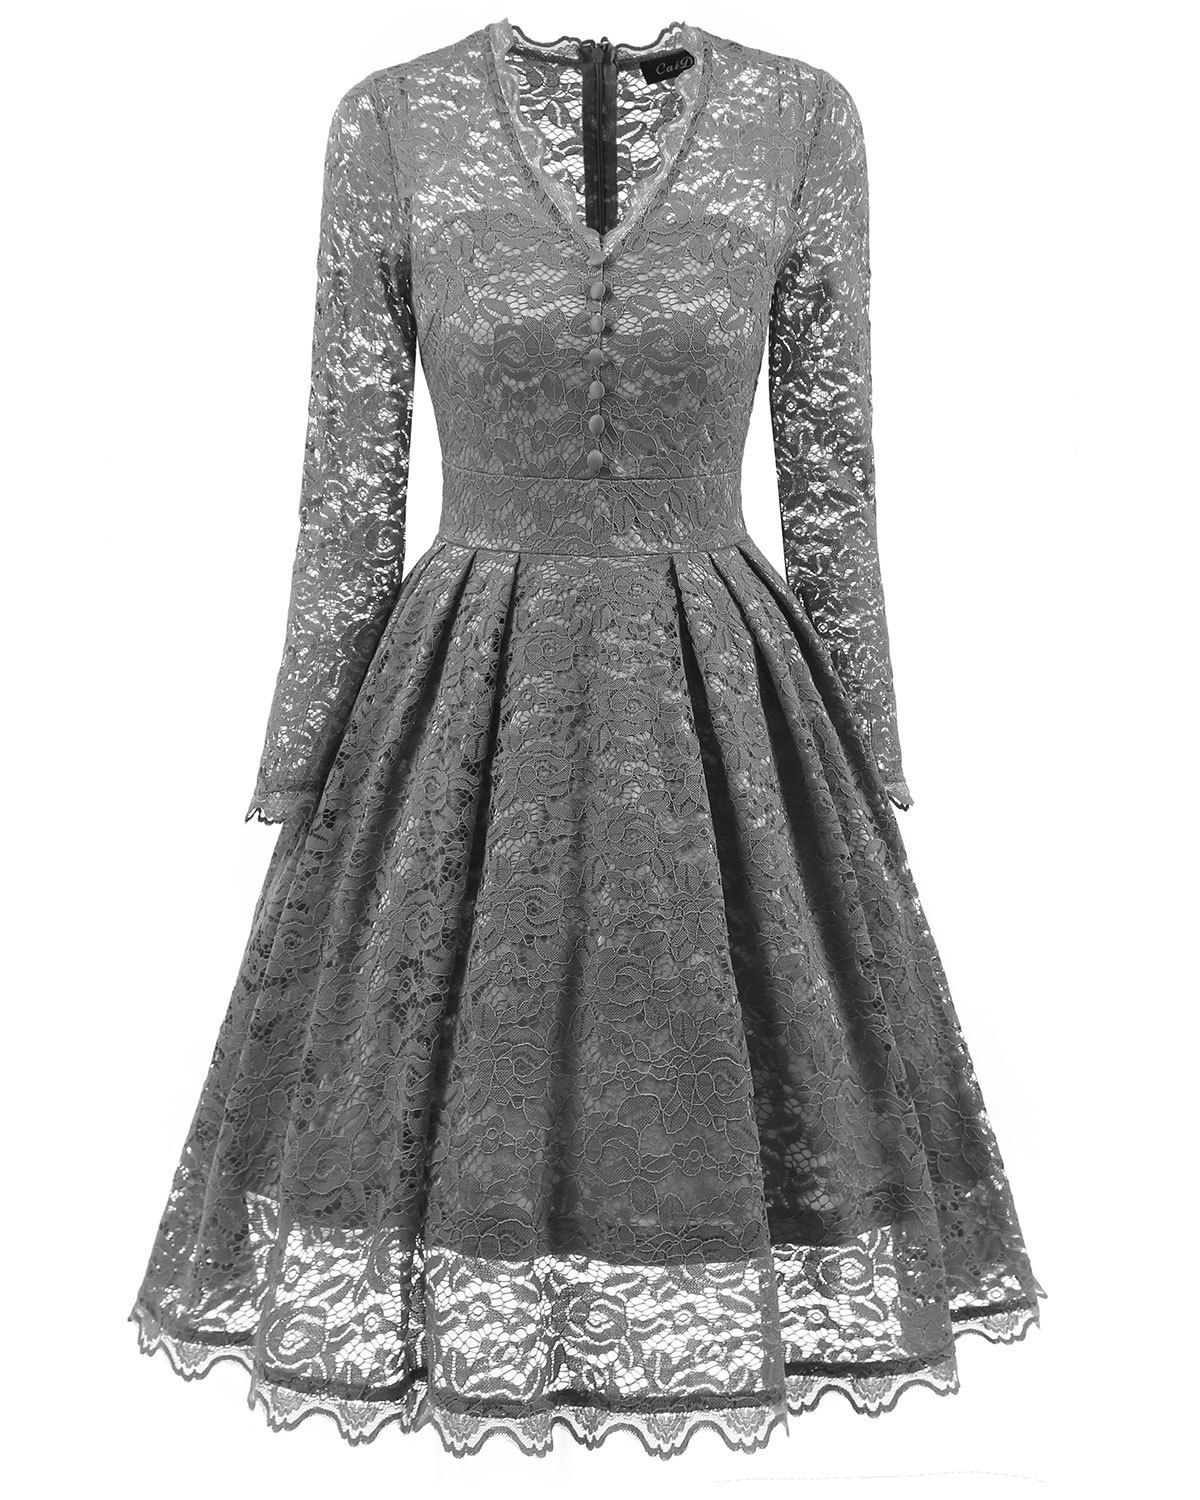 Grey V-neck Floral Lace A-line Short Dress With Long Sleeves , Homecoming Dress, Cocktail Dresses, Graduation Dresses